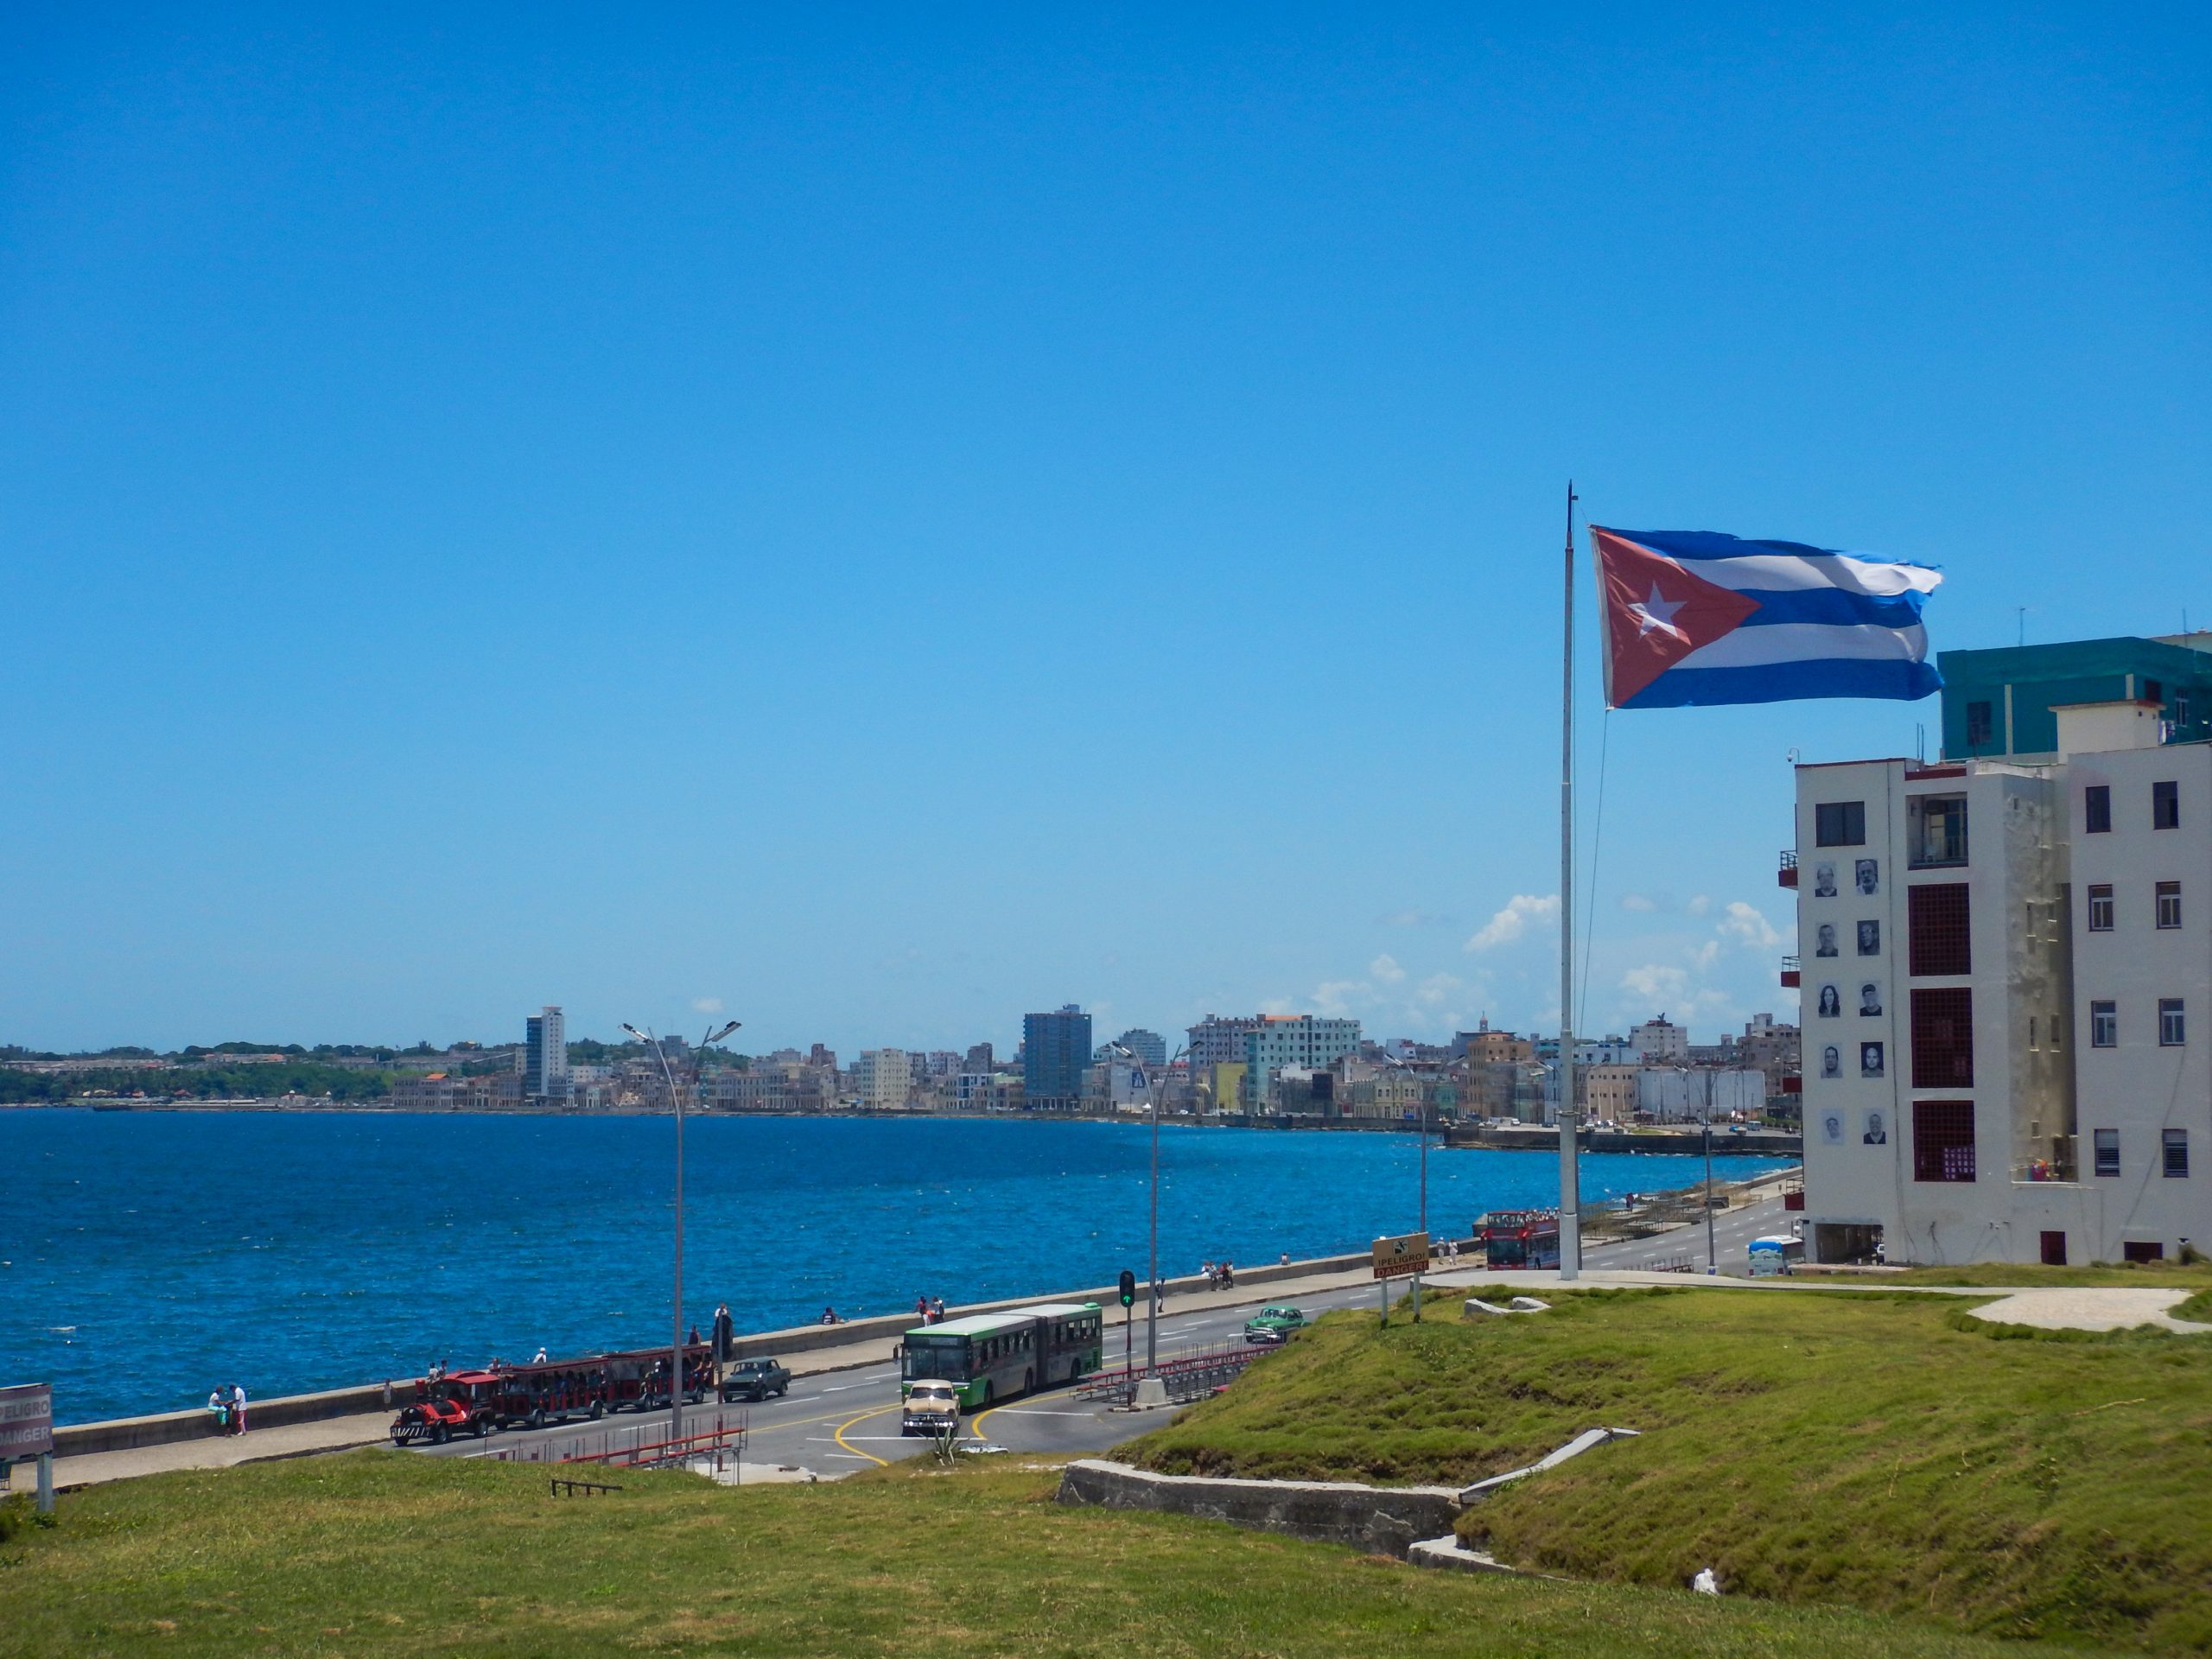 Havana Bay from the Nacional Hotel in 2015 with the Cuban flag flying high